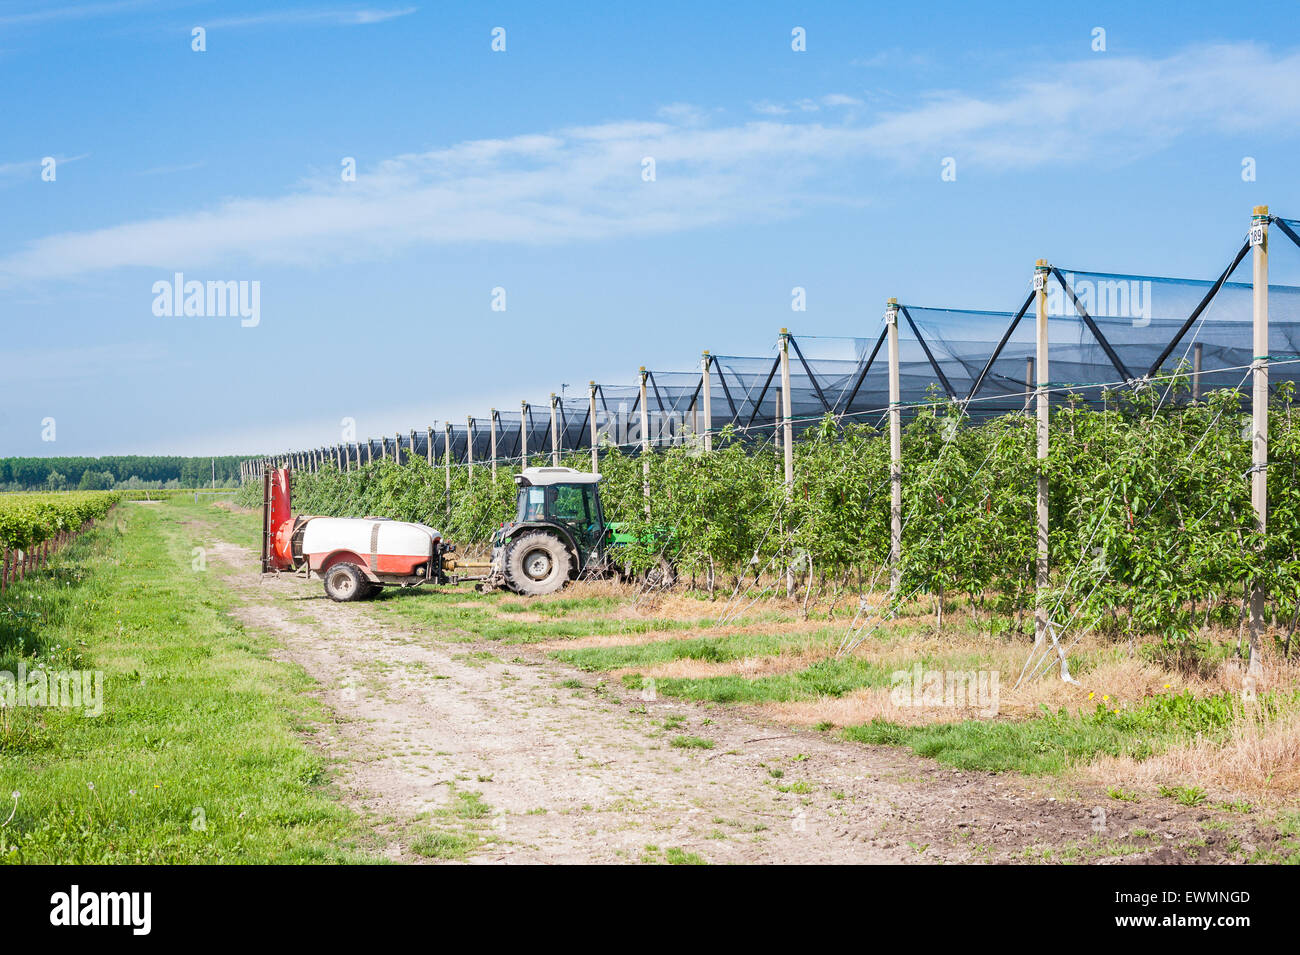 Agricultural work. Treatment pesticide to fruit trees Stock Photo